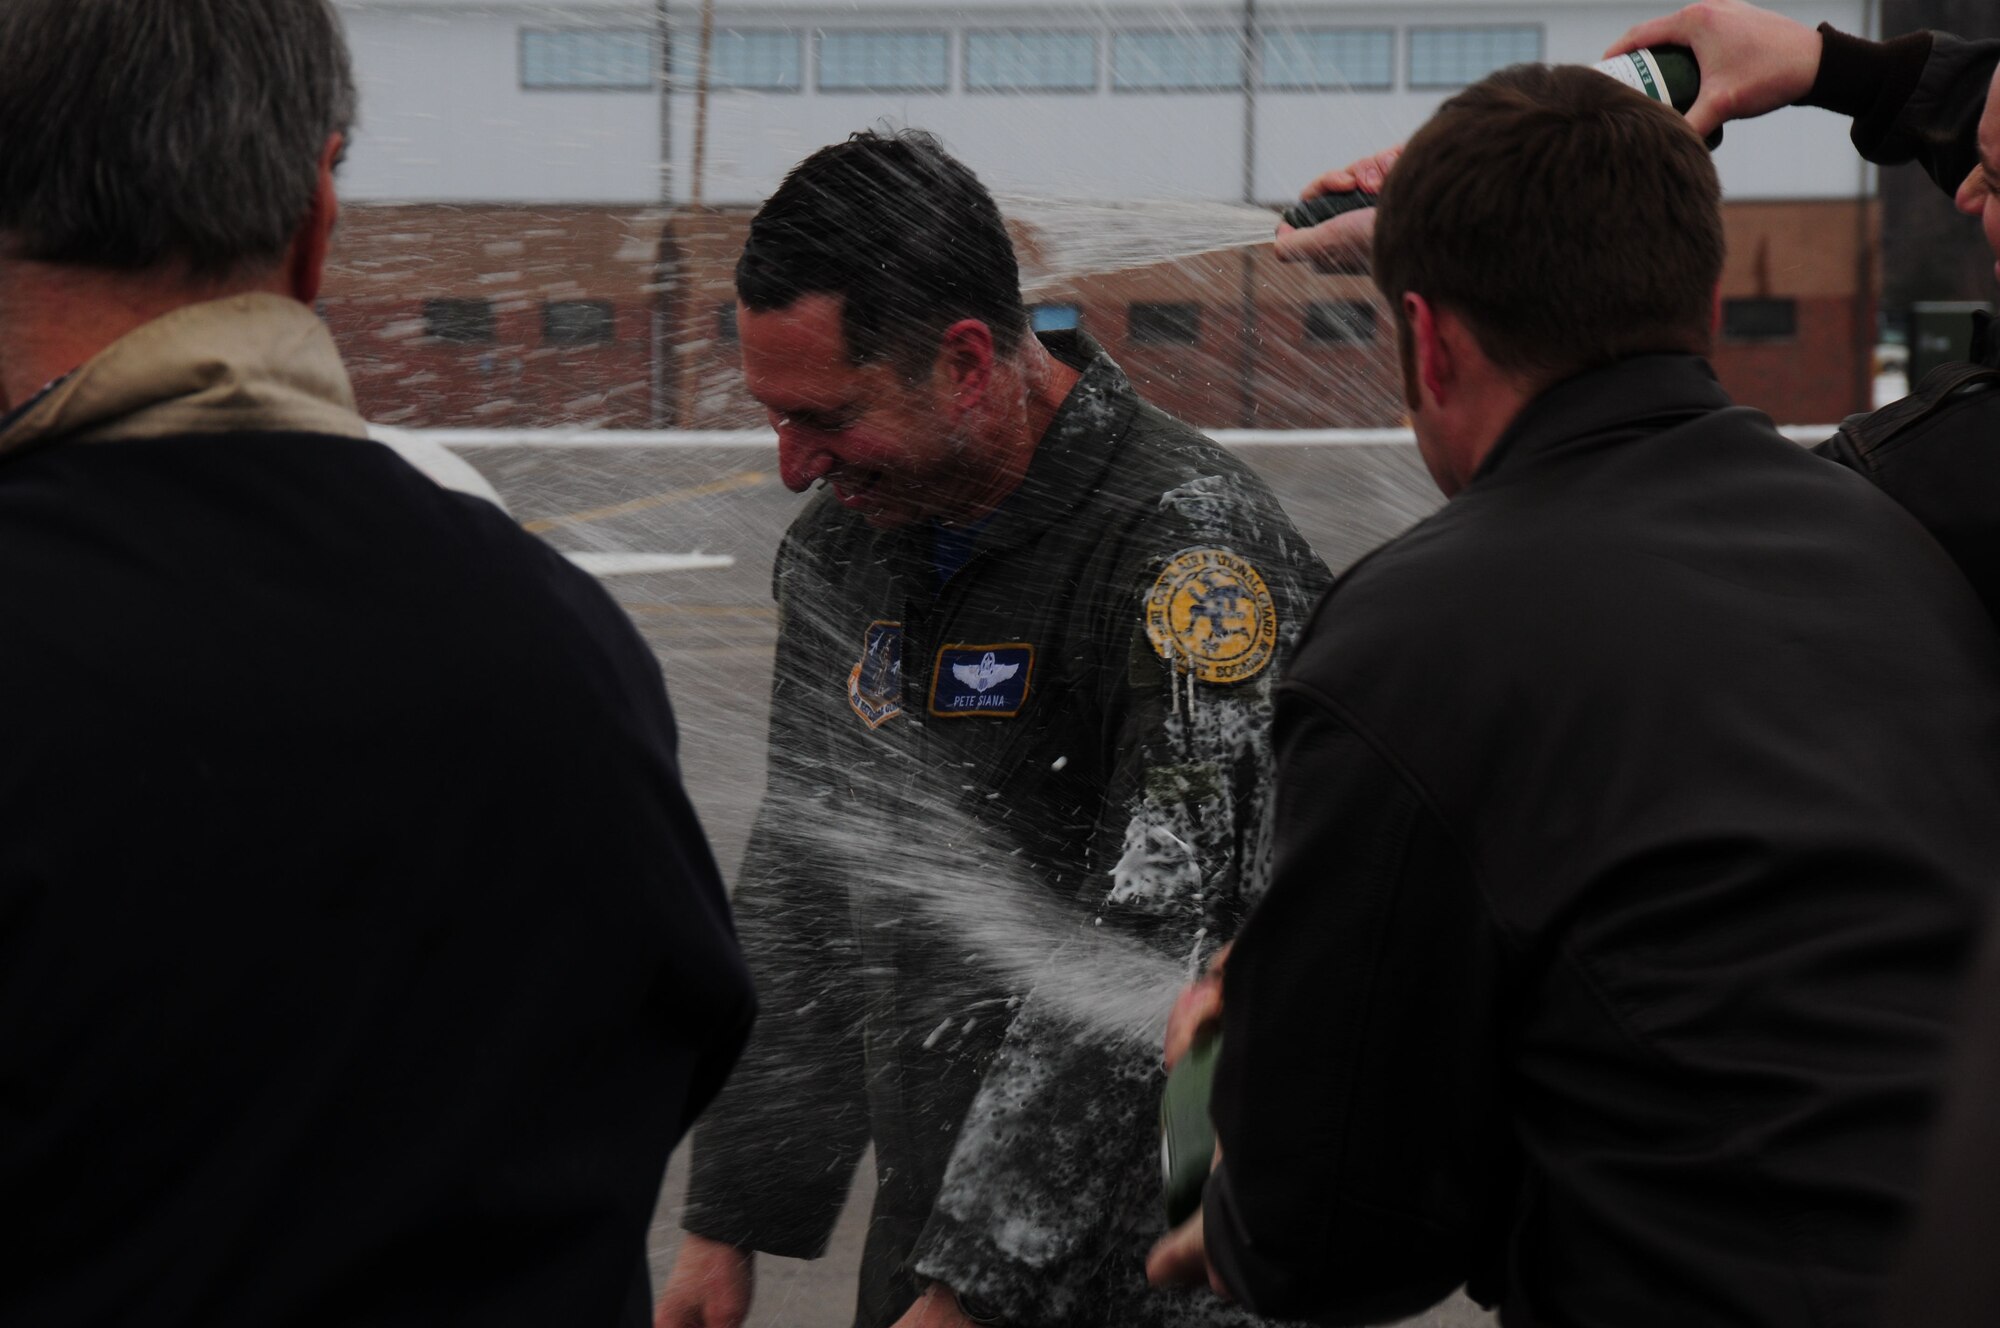 Col. Pete “Meat” Siana is greeted by the customary champagne dowsing following his “fini-flight” at Bradley Air National Guard Base in East Granby, Conn., March 3, 2012. Siana has flown for more than 23 years with the United States Air Force and has logged more than 4,000 military flying hours. (U.S. Air Force photo by Airman 1st Class Emmanuel Santiago)